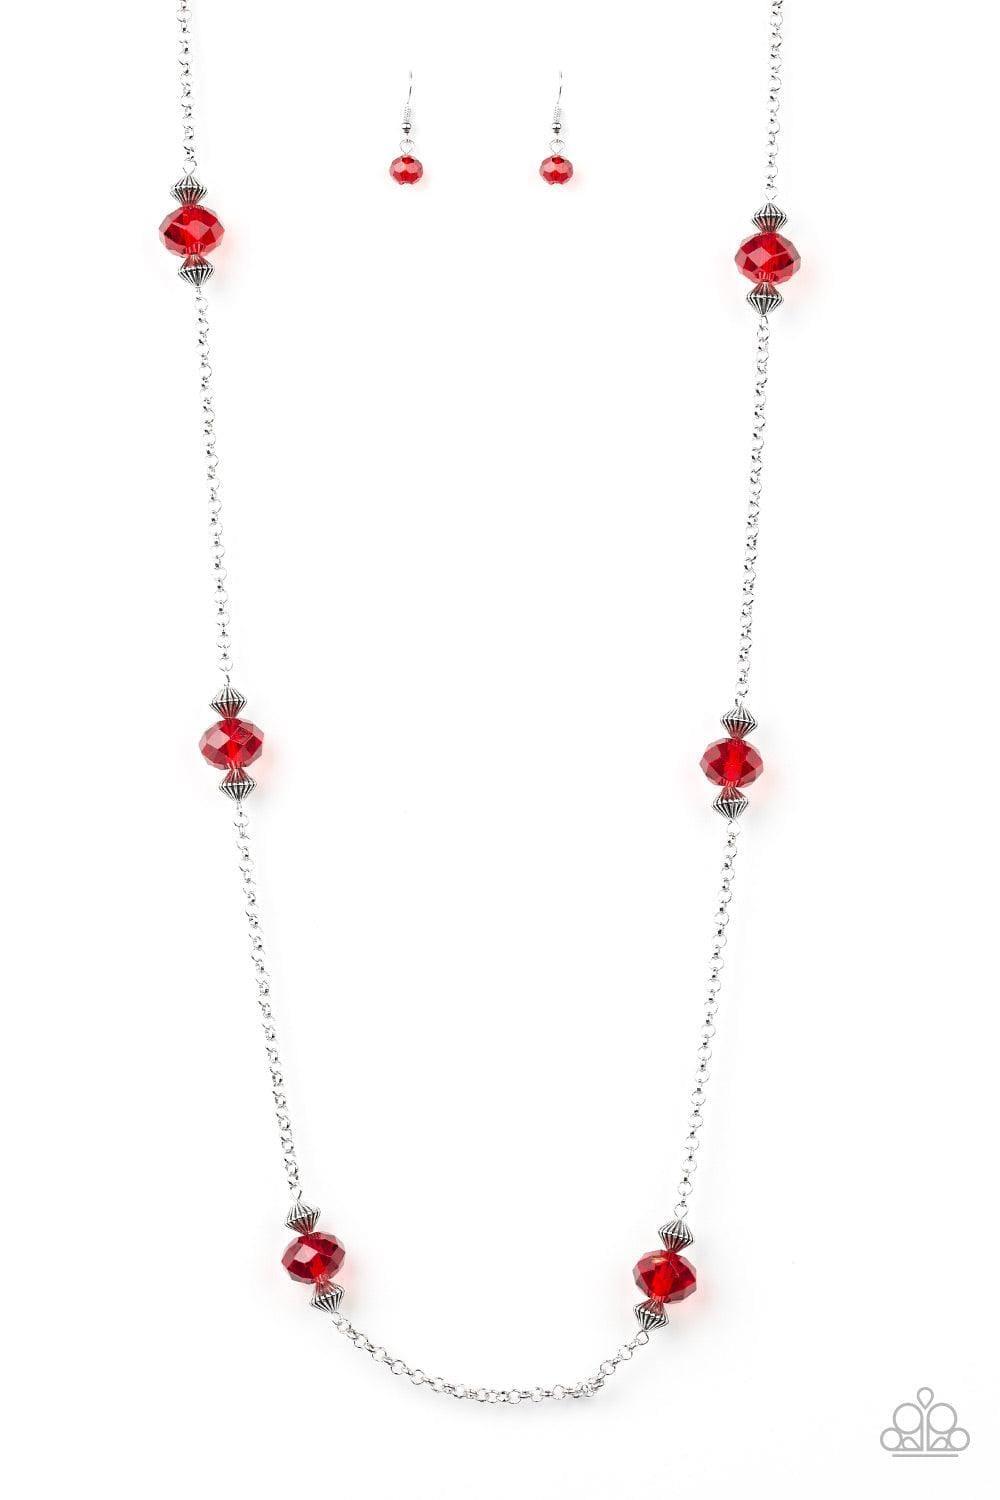 Paparazzi Accessories - Season Of Sparkle - Red Necklace - Bling by JessieK